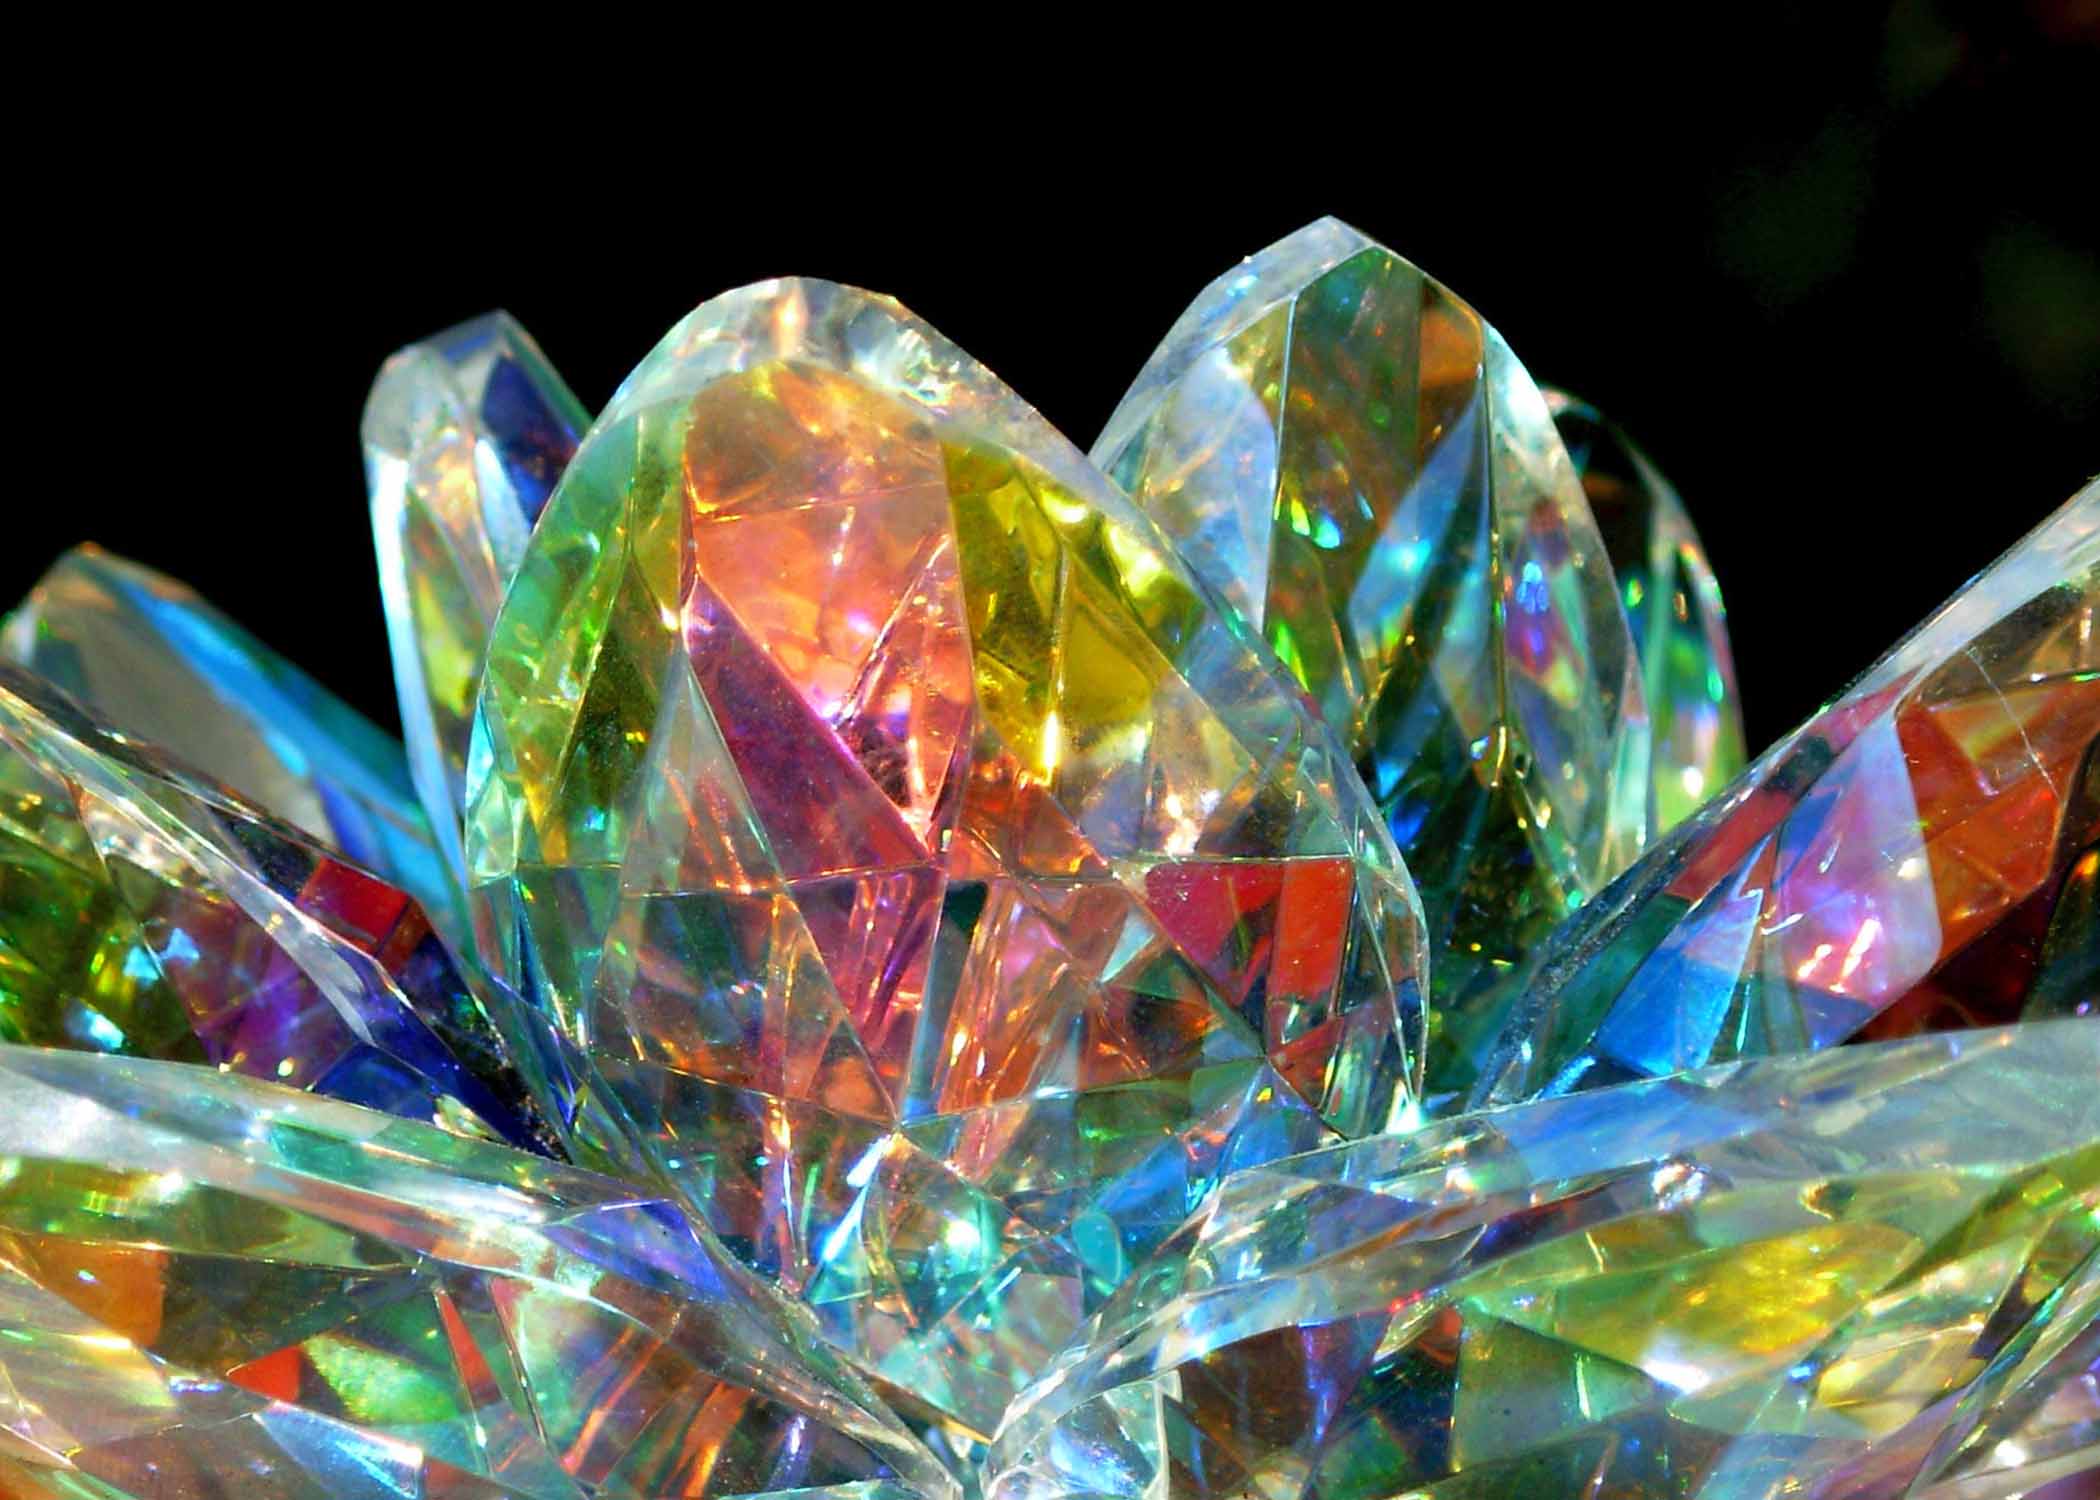 Collection of Crystals Wallpaper on Spyder Wallpaper 1280×1024